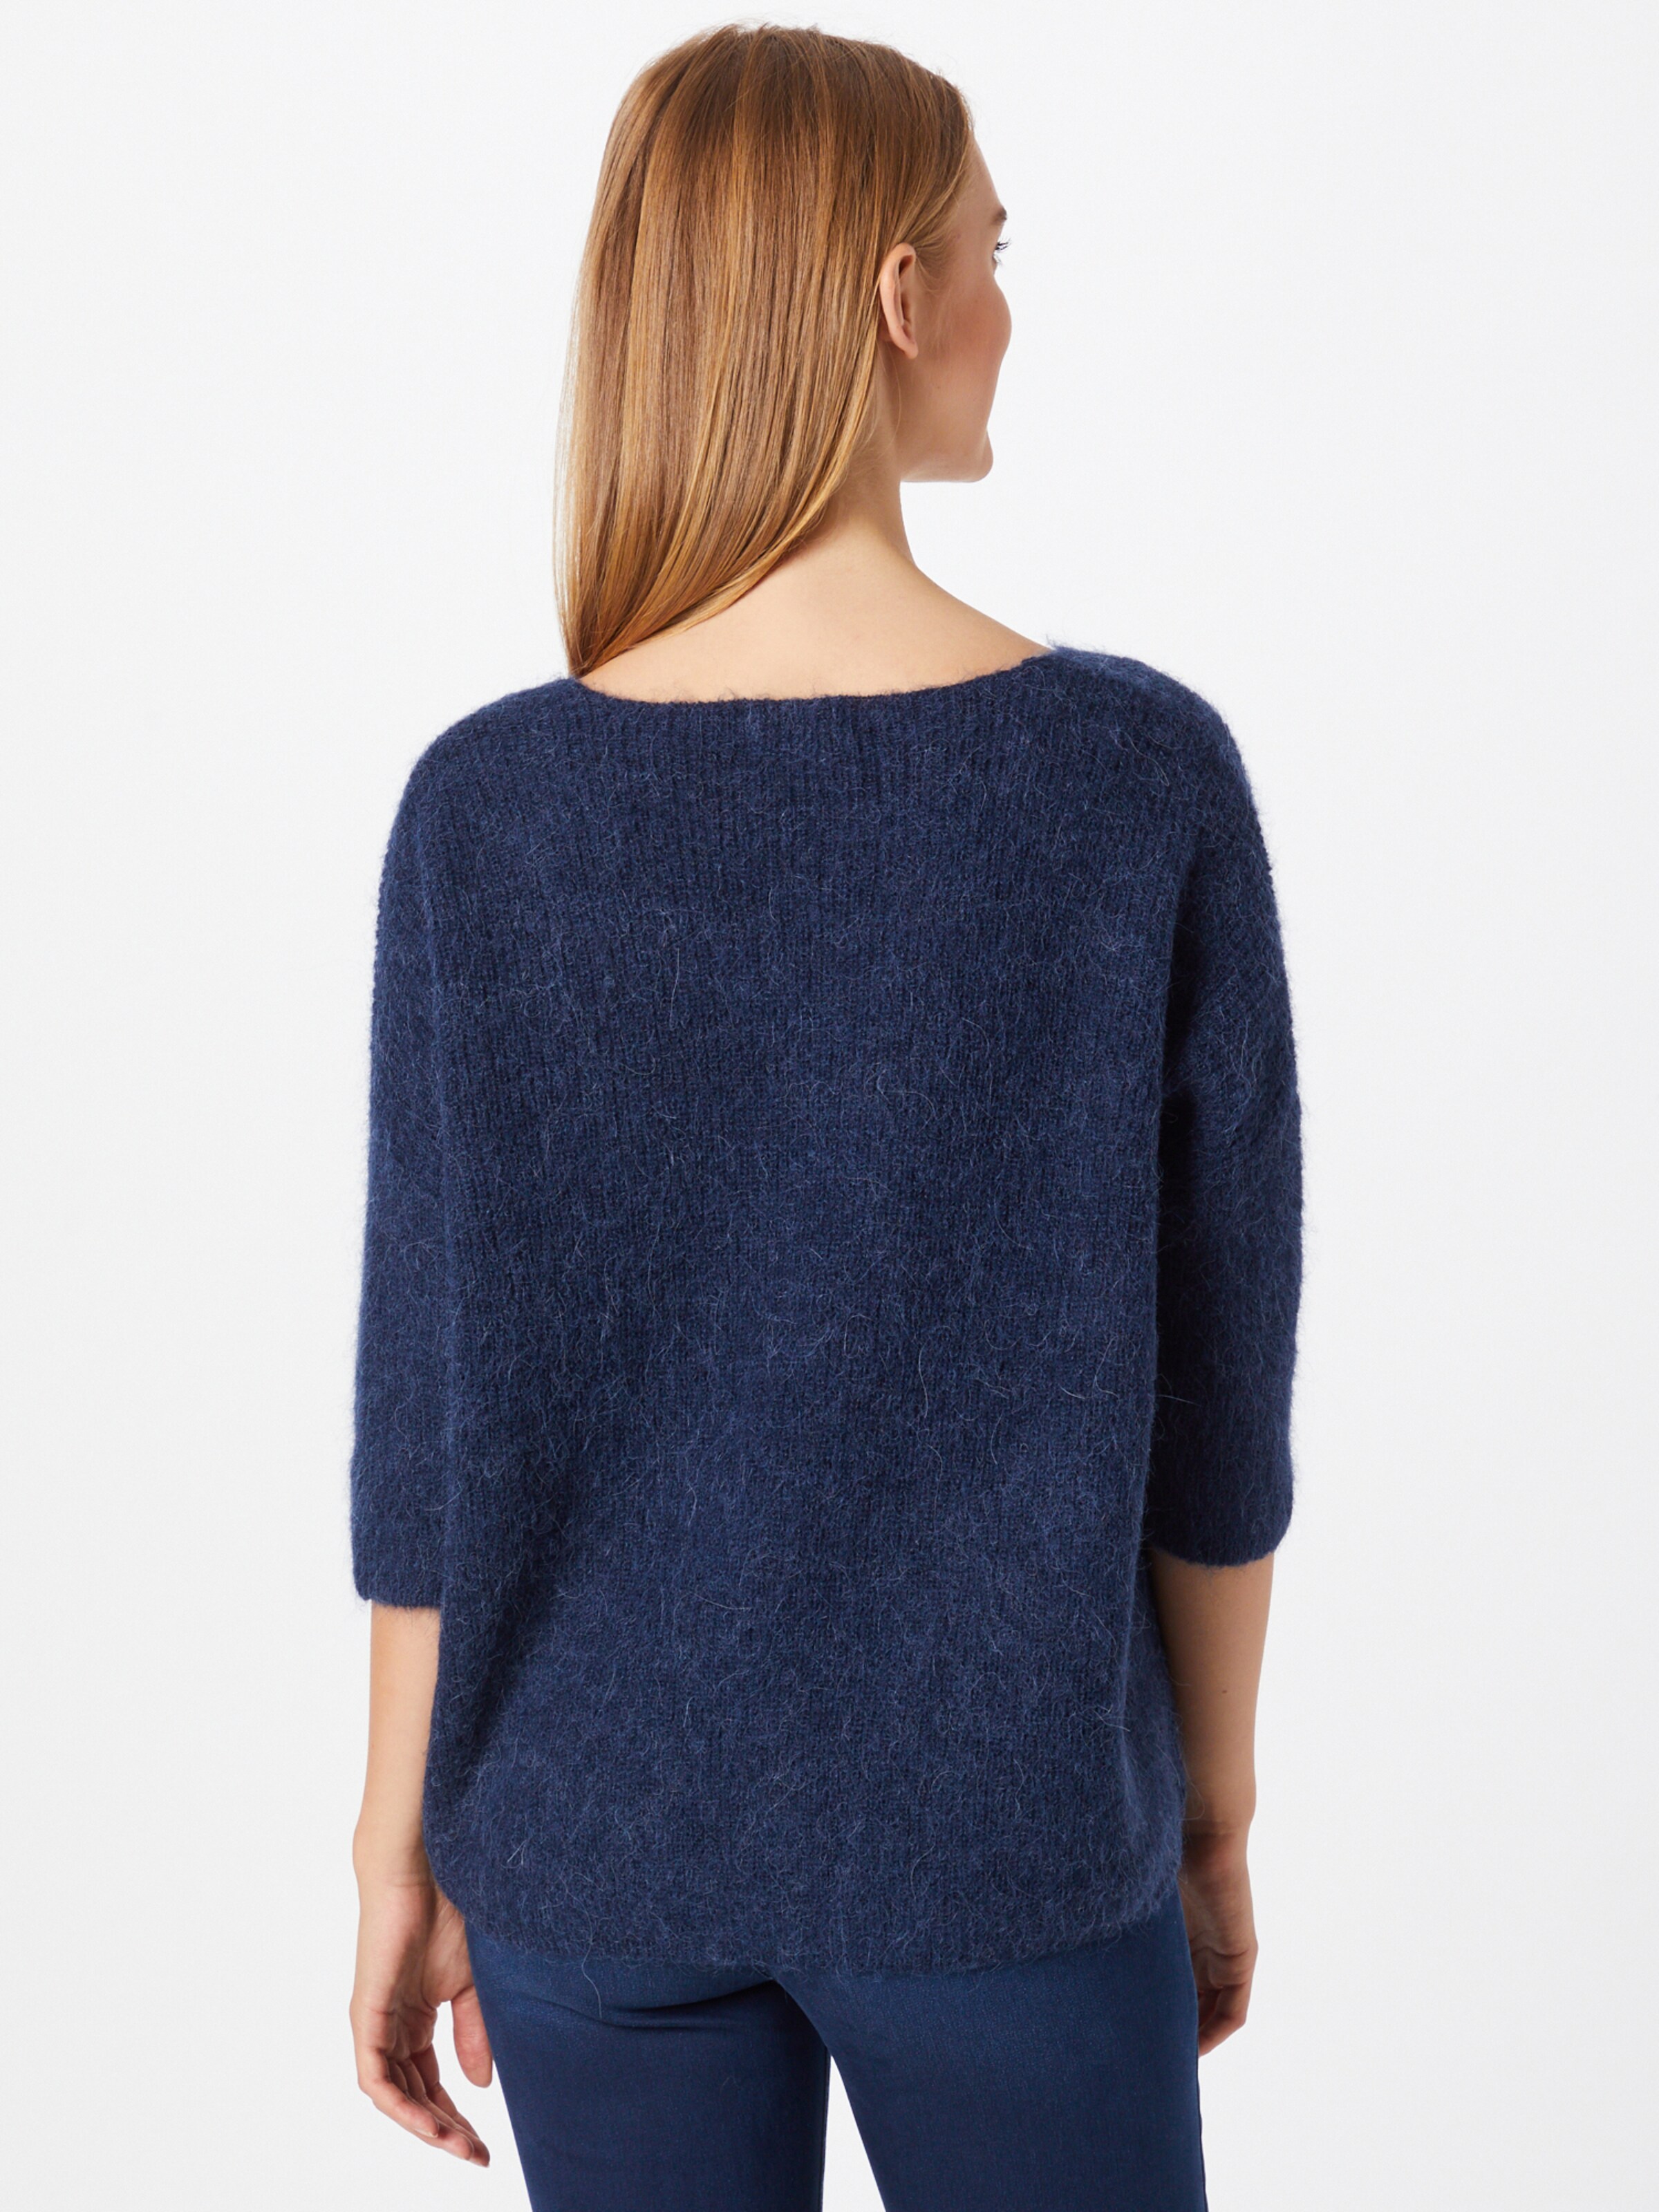 Pulls et mailles Pull-over Tuesday SOAKED IN LUXURY en Bleu Marine 